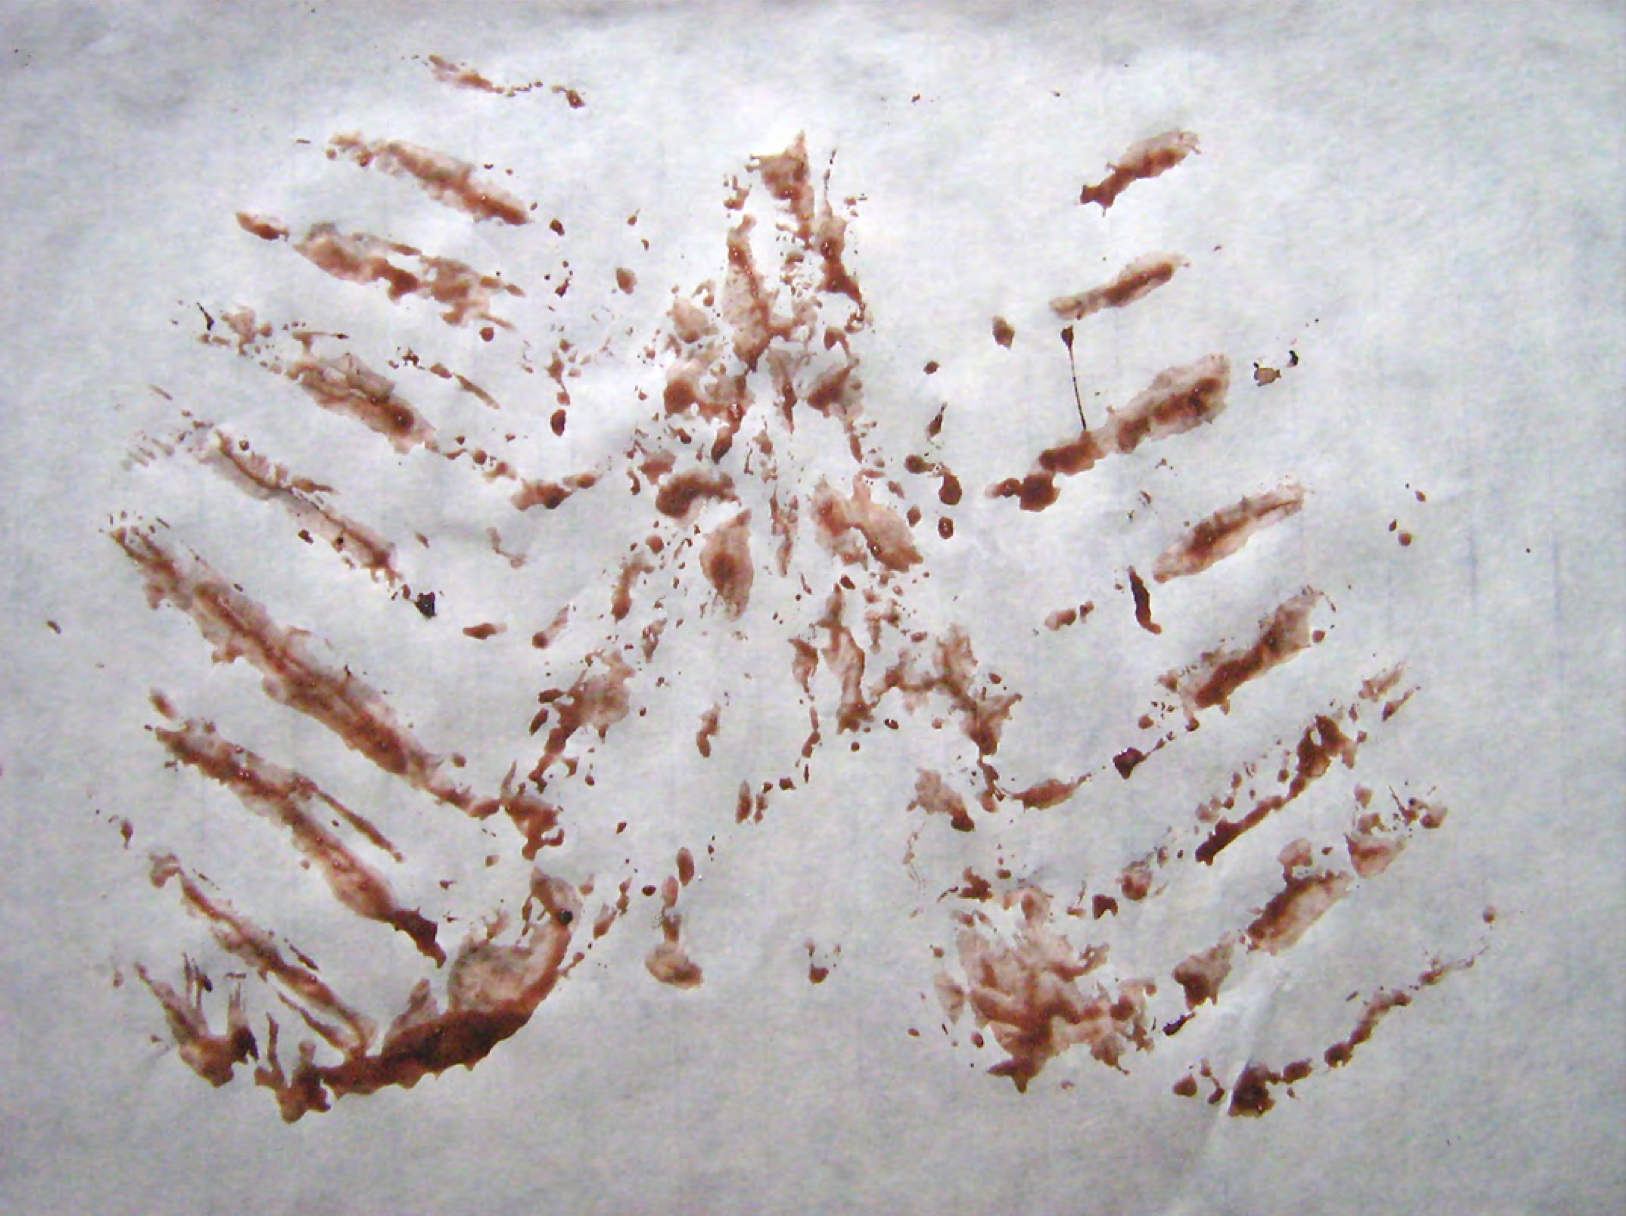 Mike Osterhout, RIBS, 2012. Deer blood on rice paper. Courtesy of the artist.